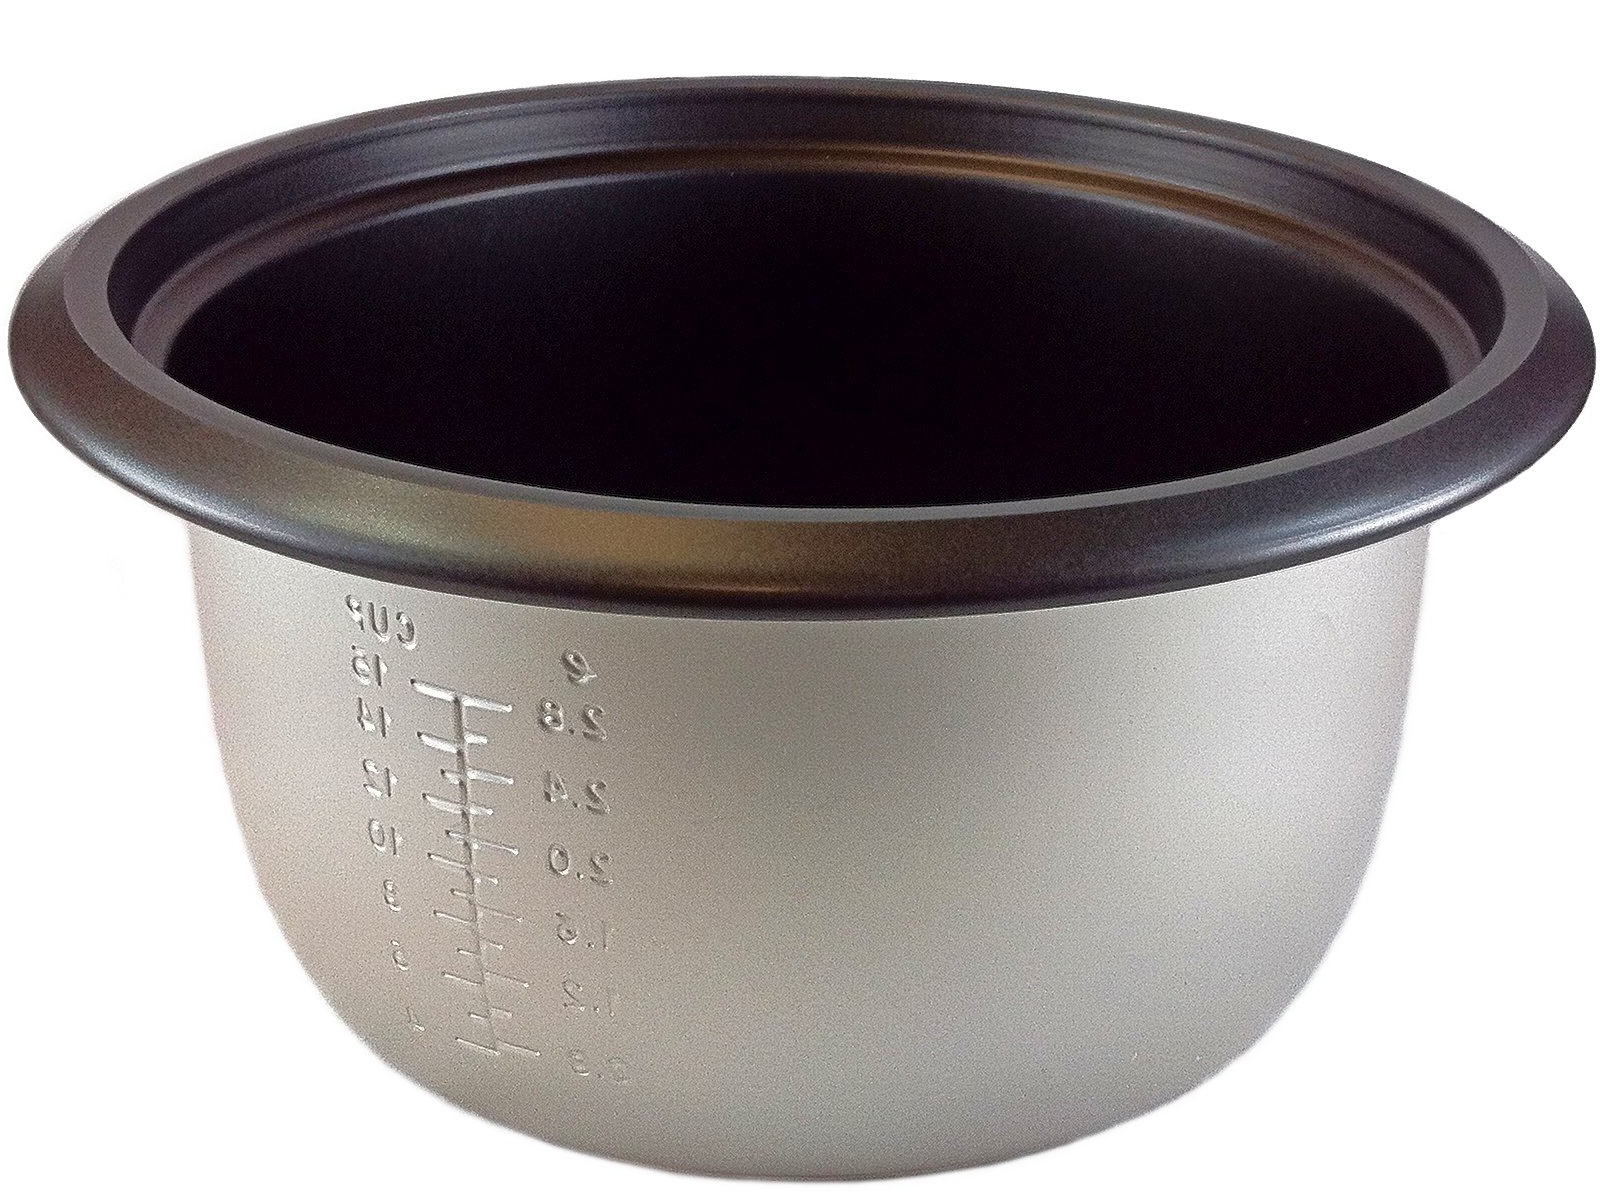 Cooking Pot, 30 Cup